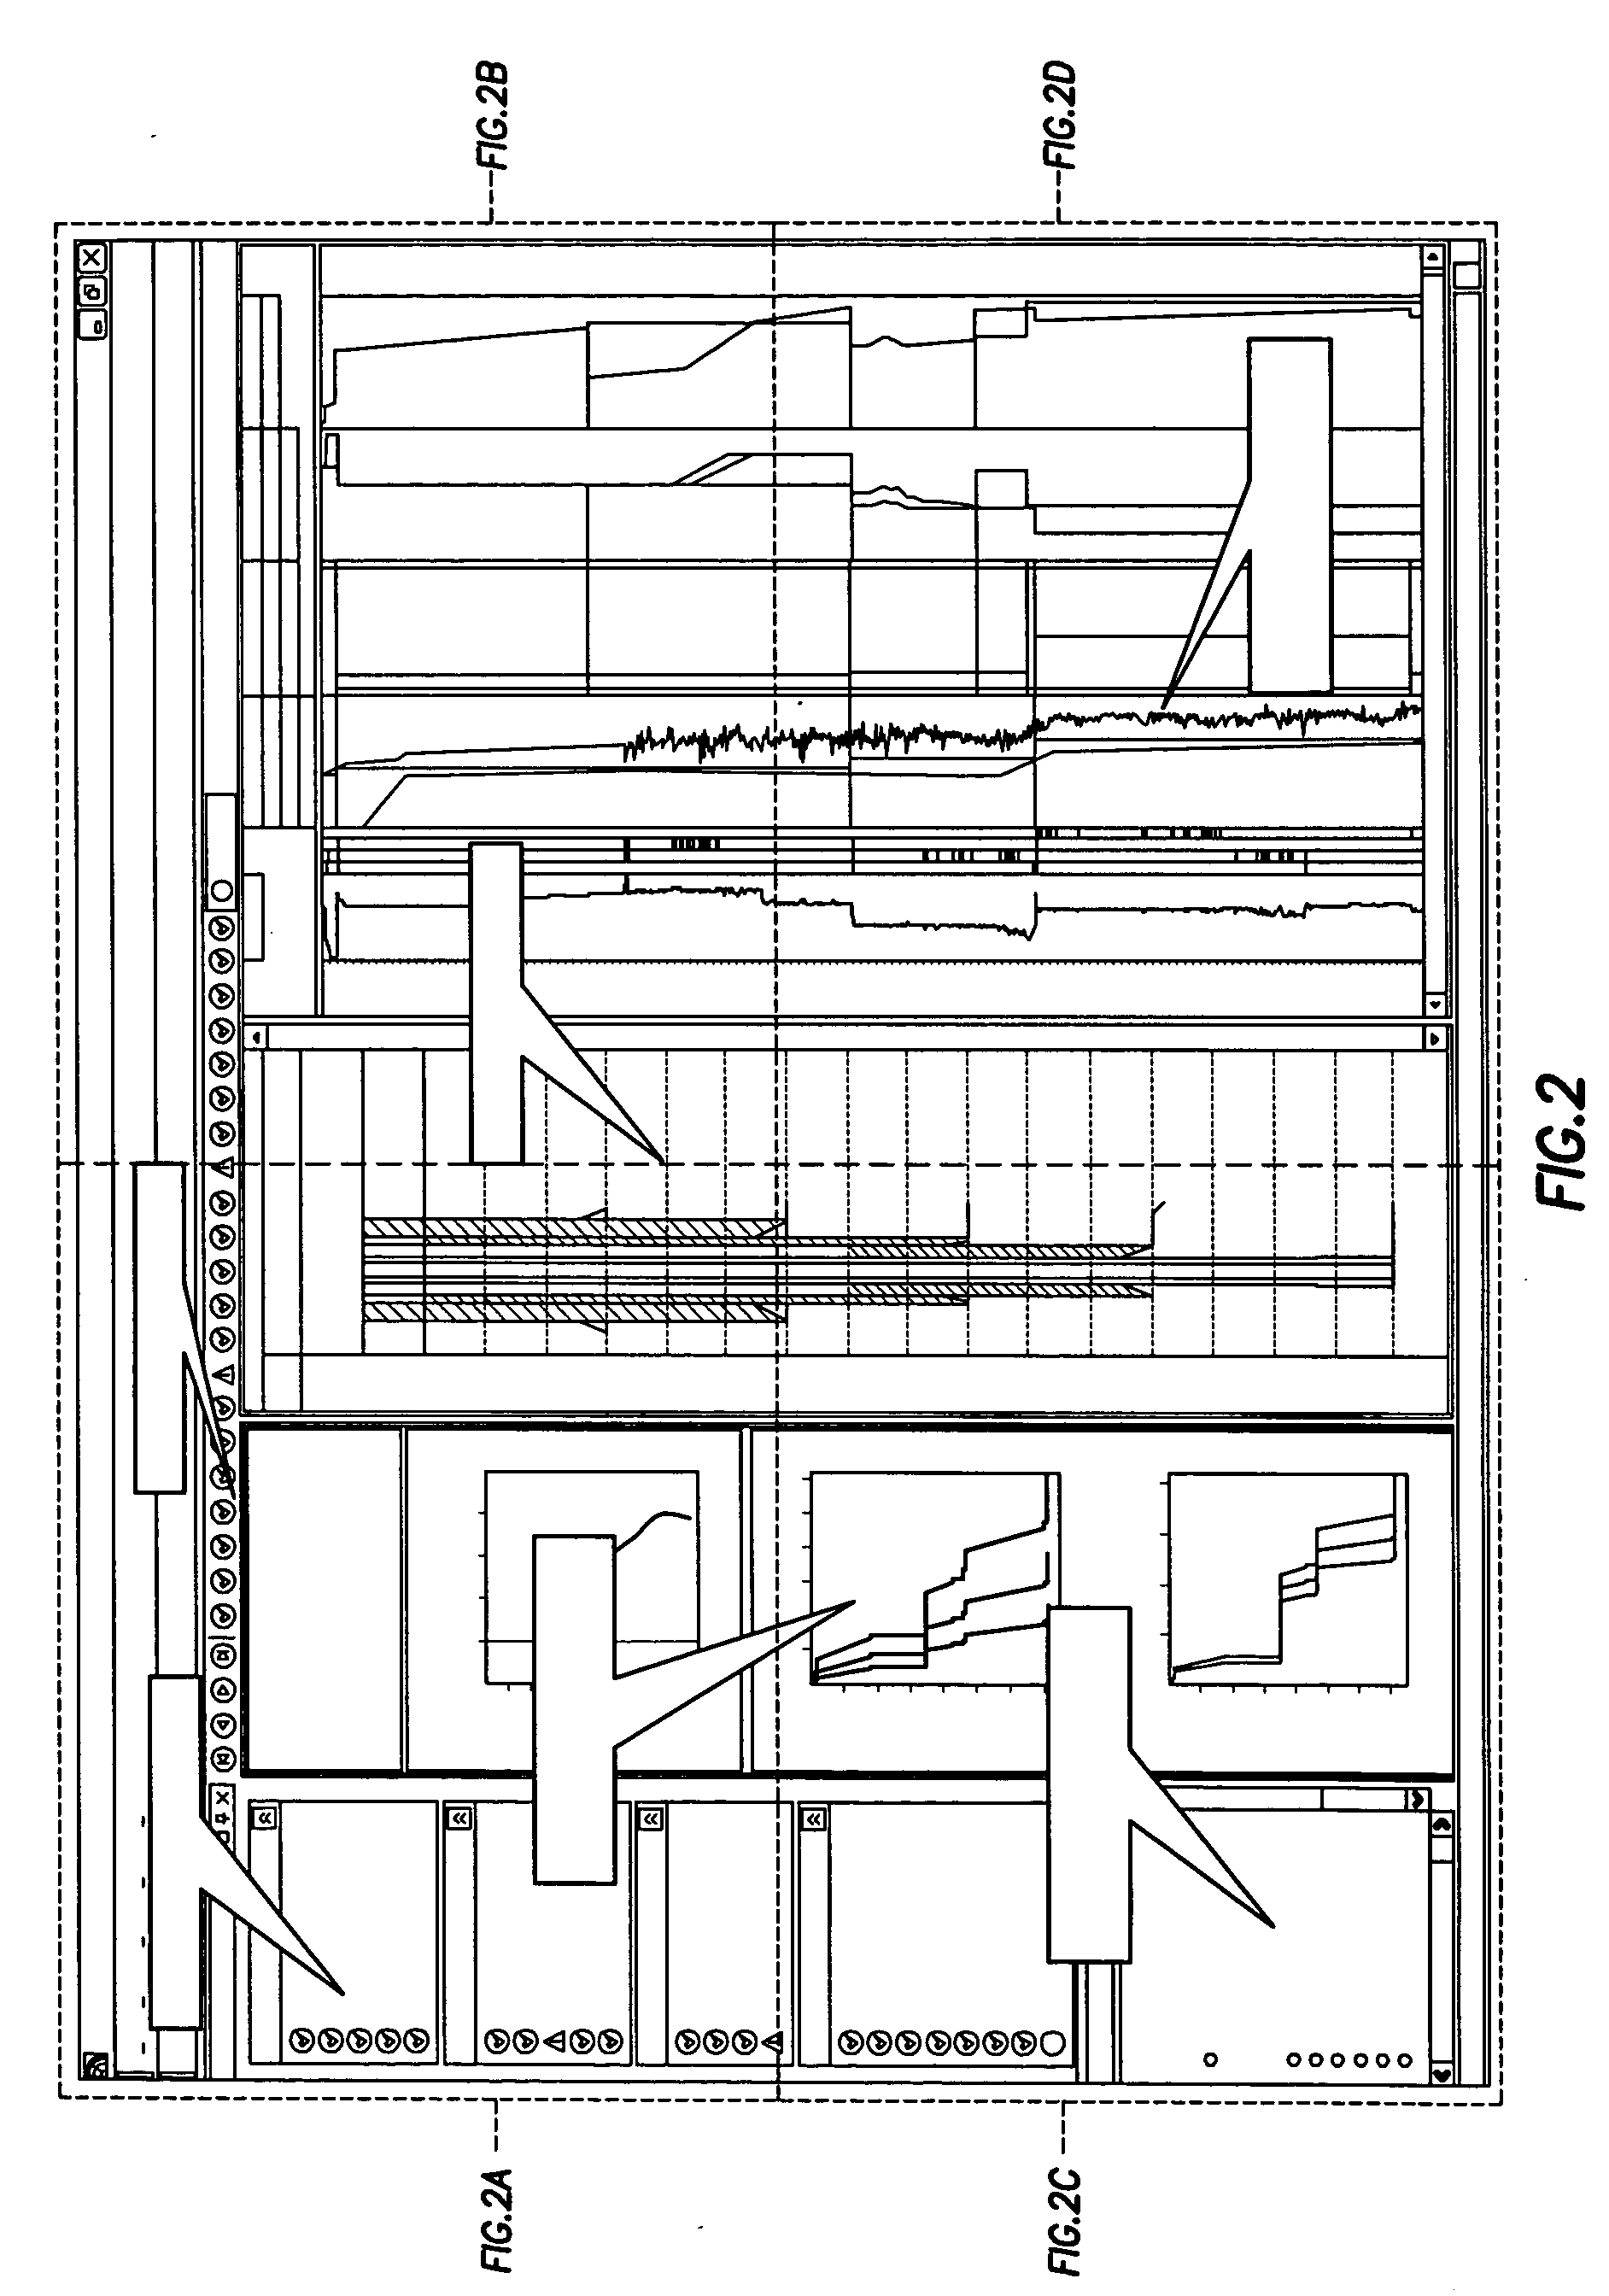 Method and apparatus and program storage device adapted for automatic drill string design based on wellbore geometry and trajectory requirements